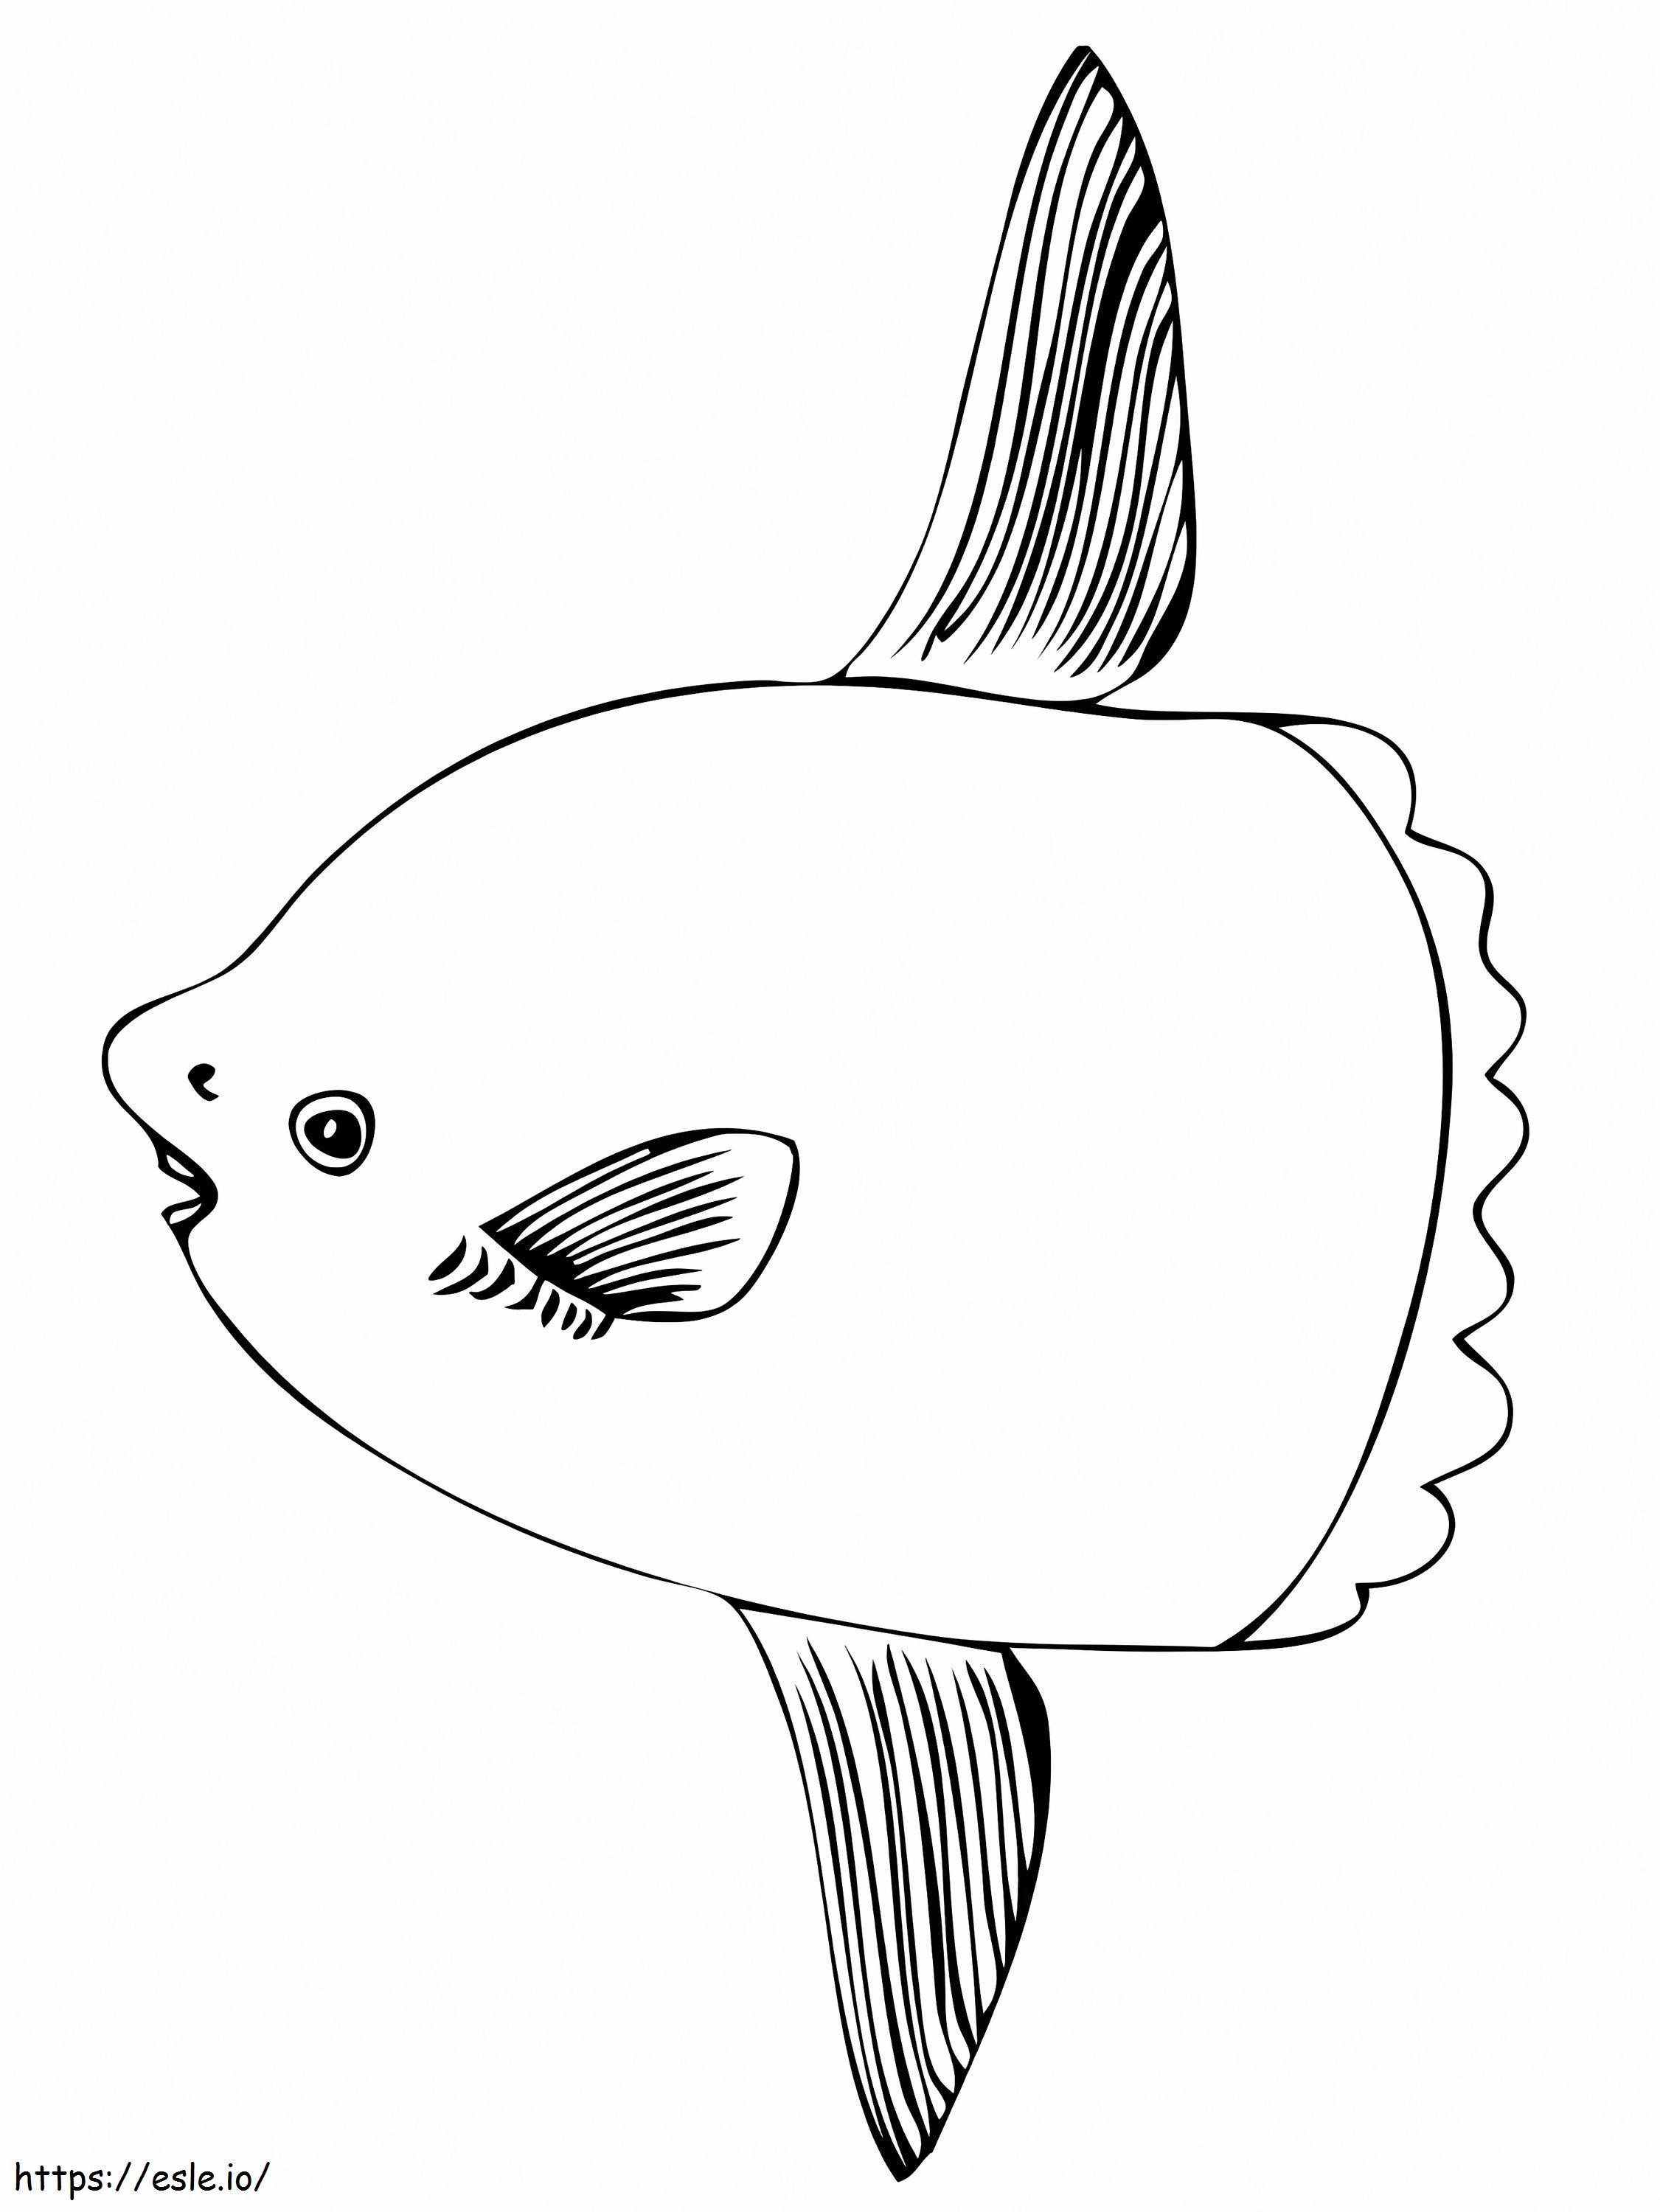 Free Sunfish coloring page